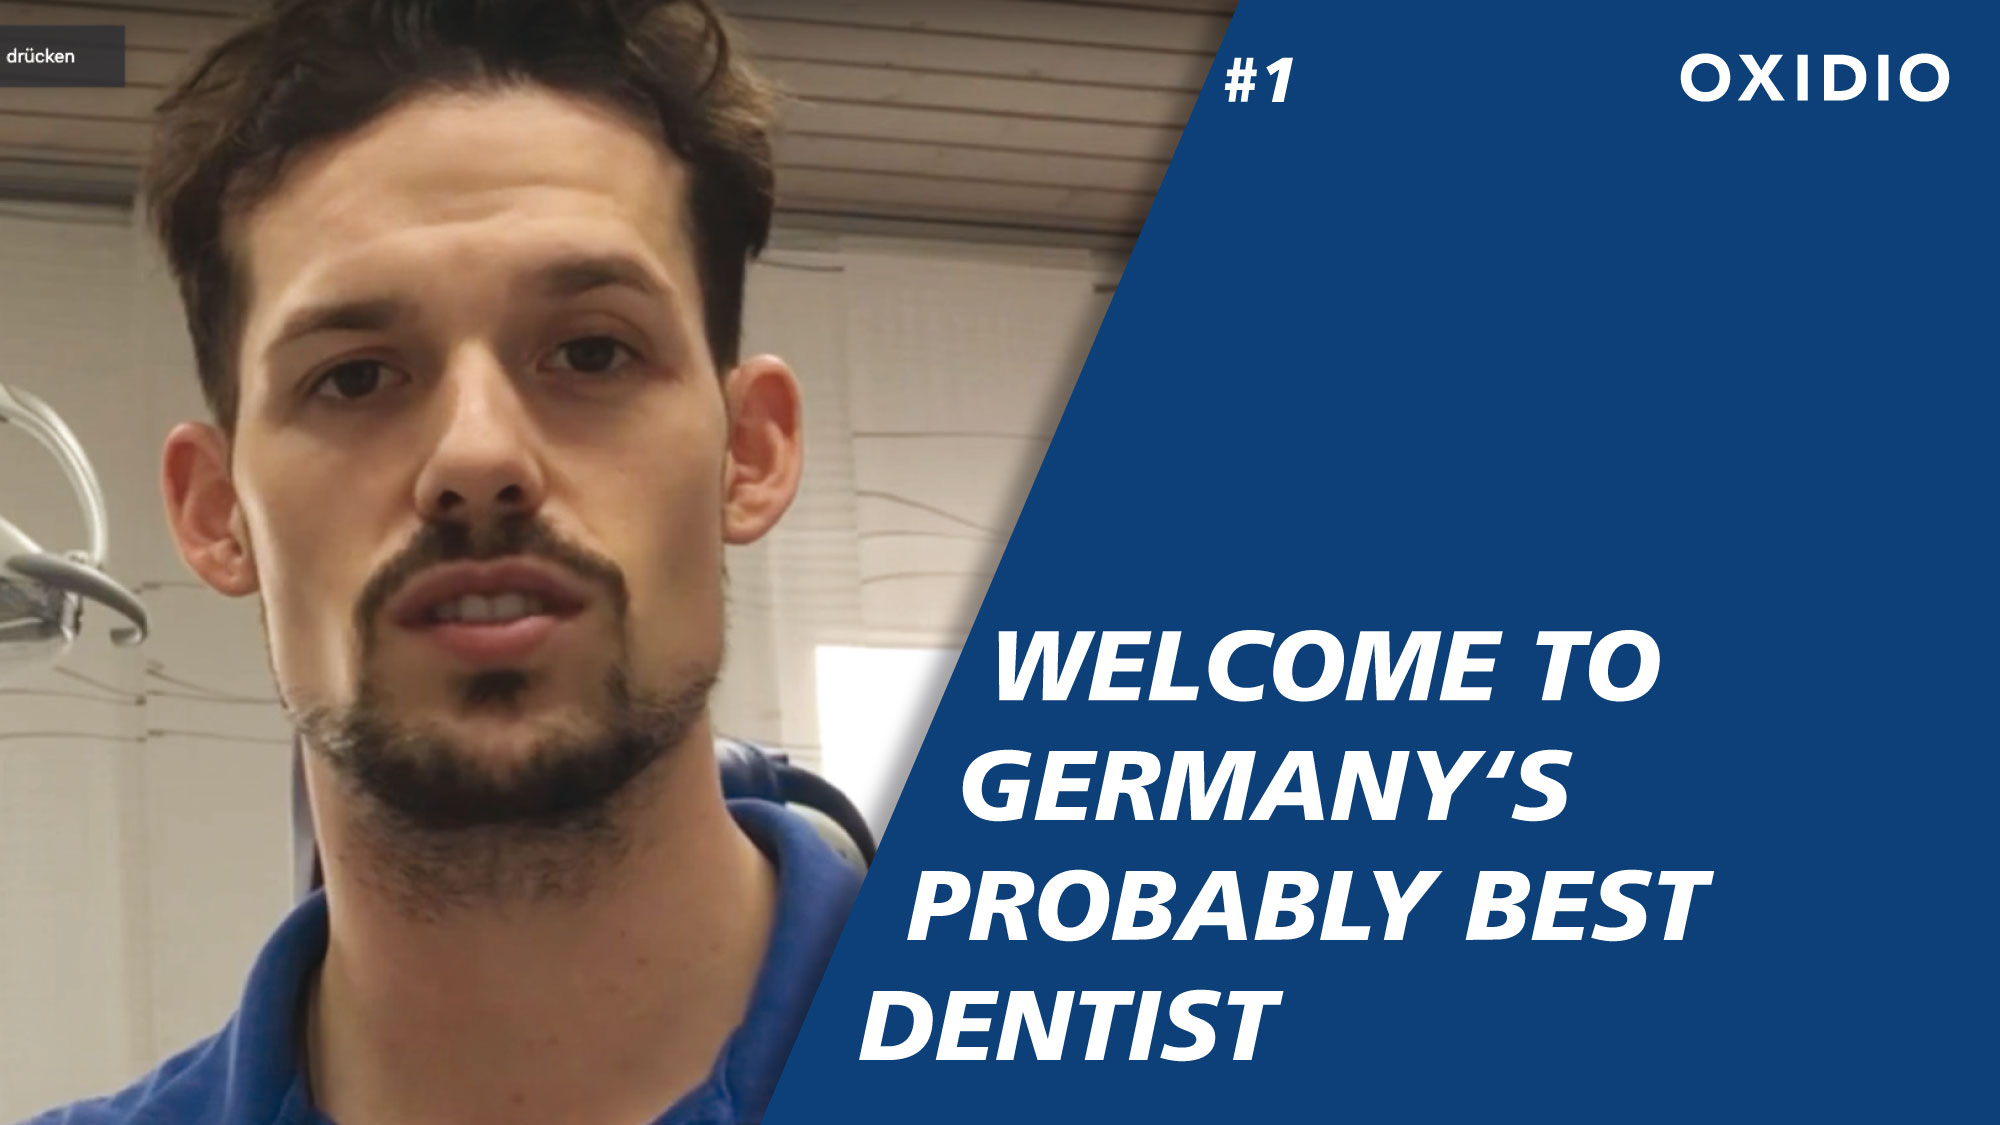 Welcome to Germany‘s probably best dentist